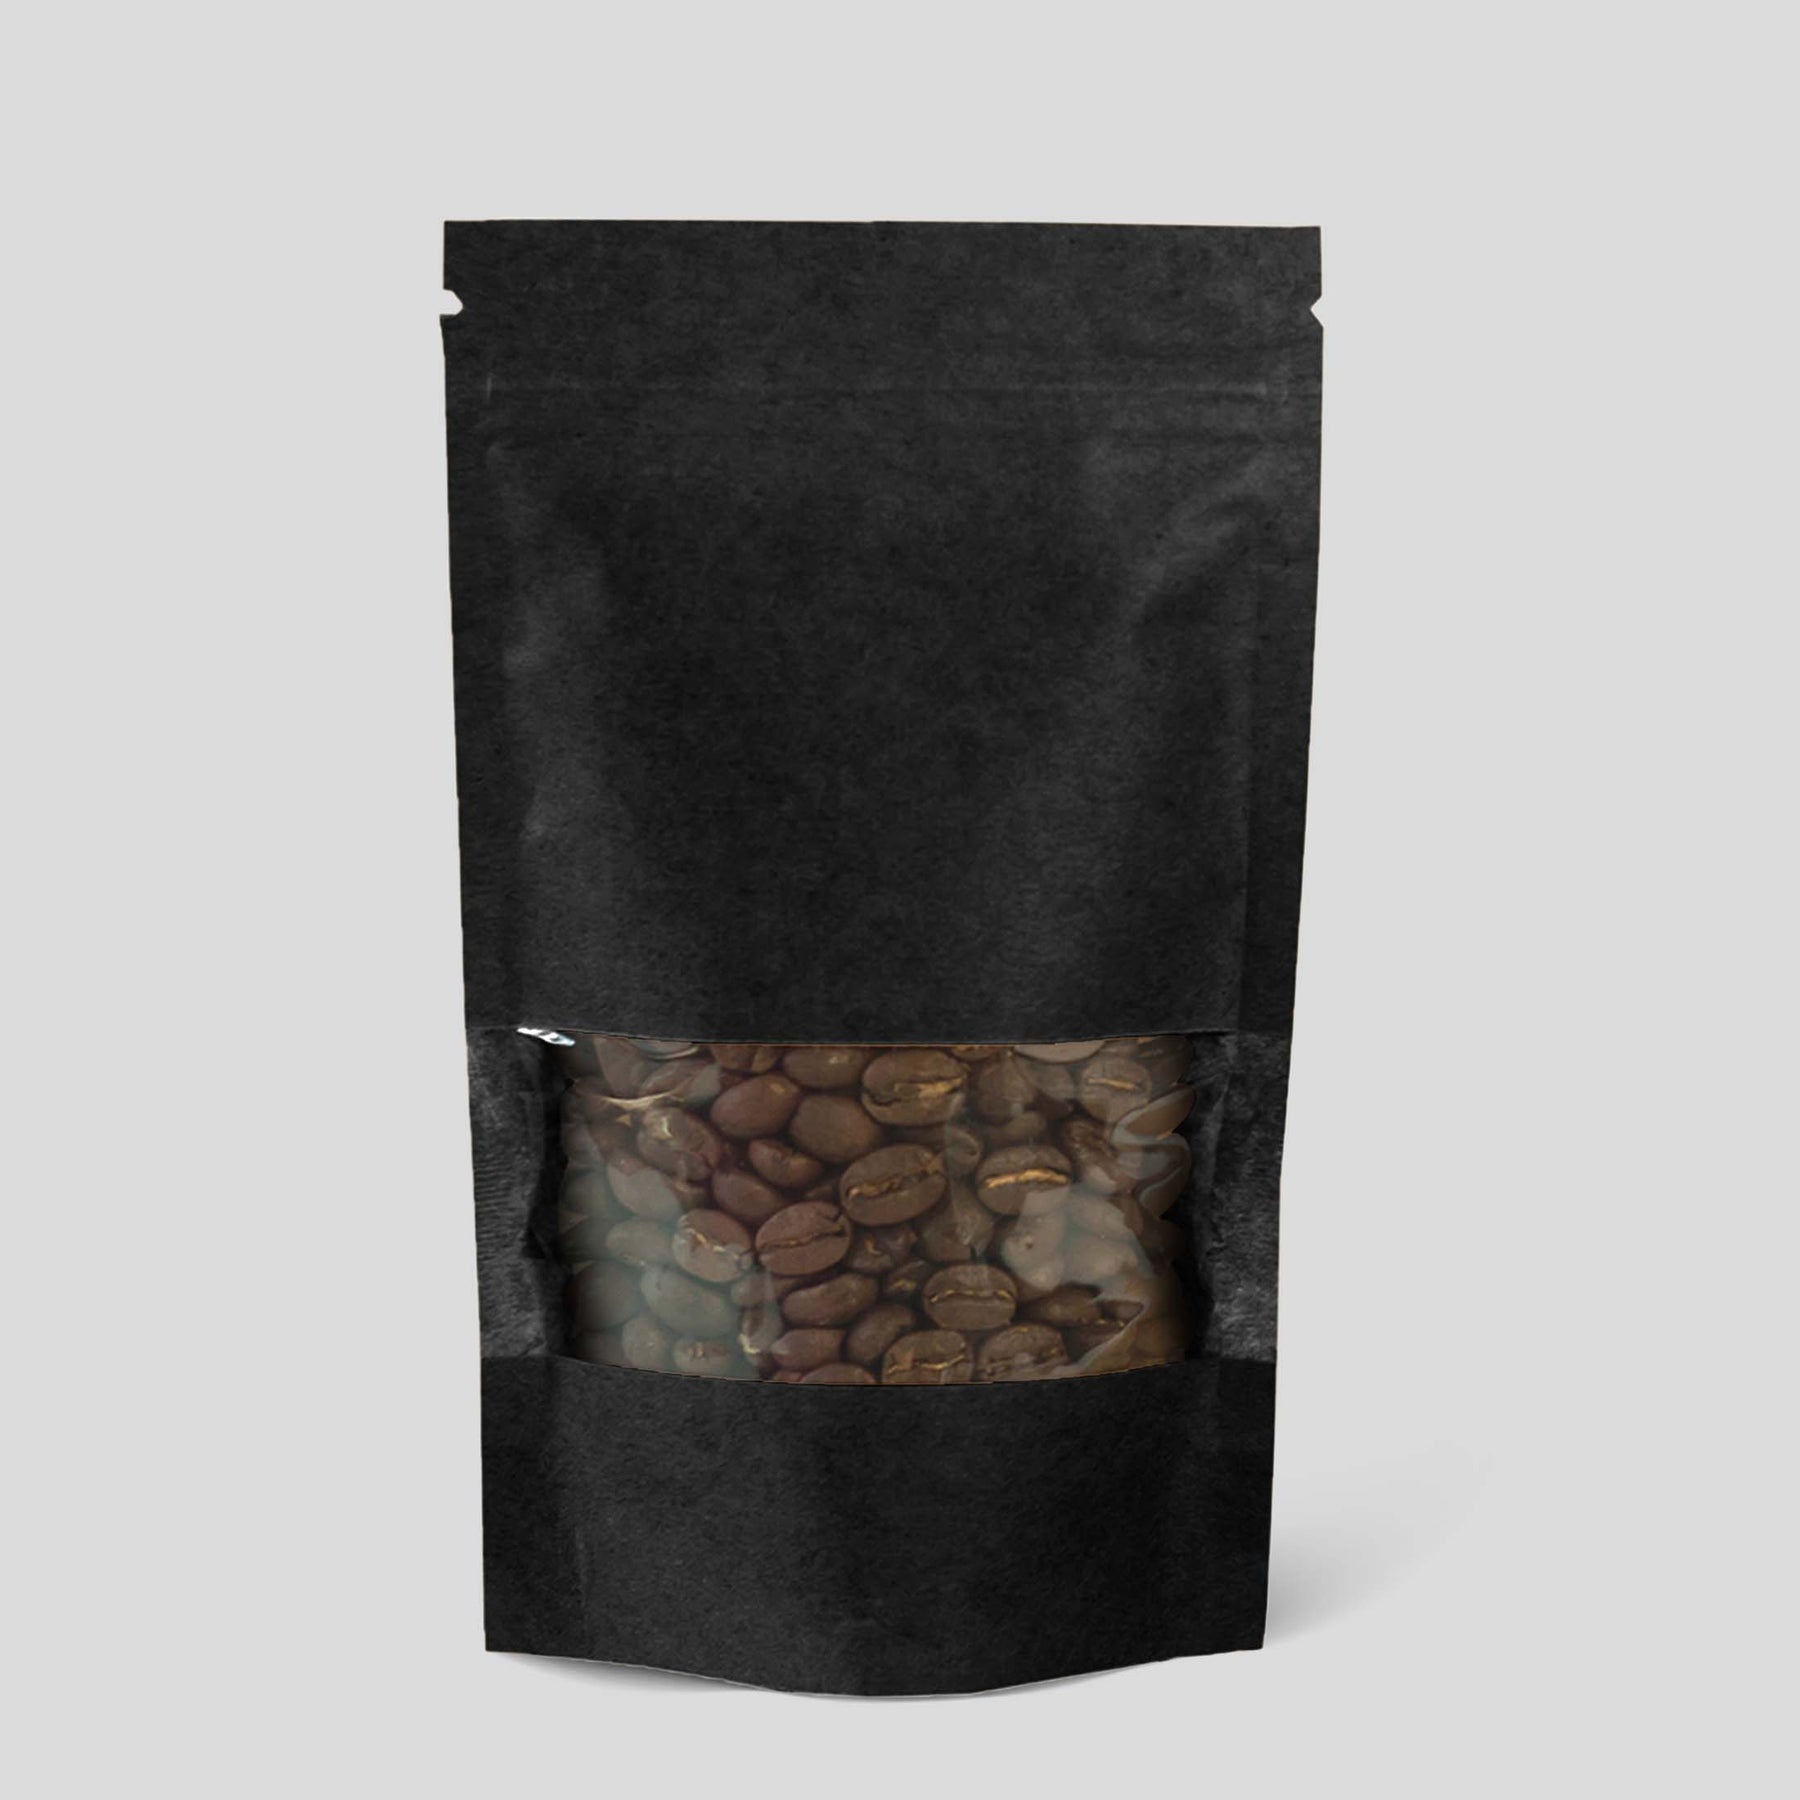 Rectangle Window Stand Up Pouches